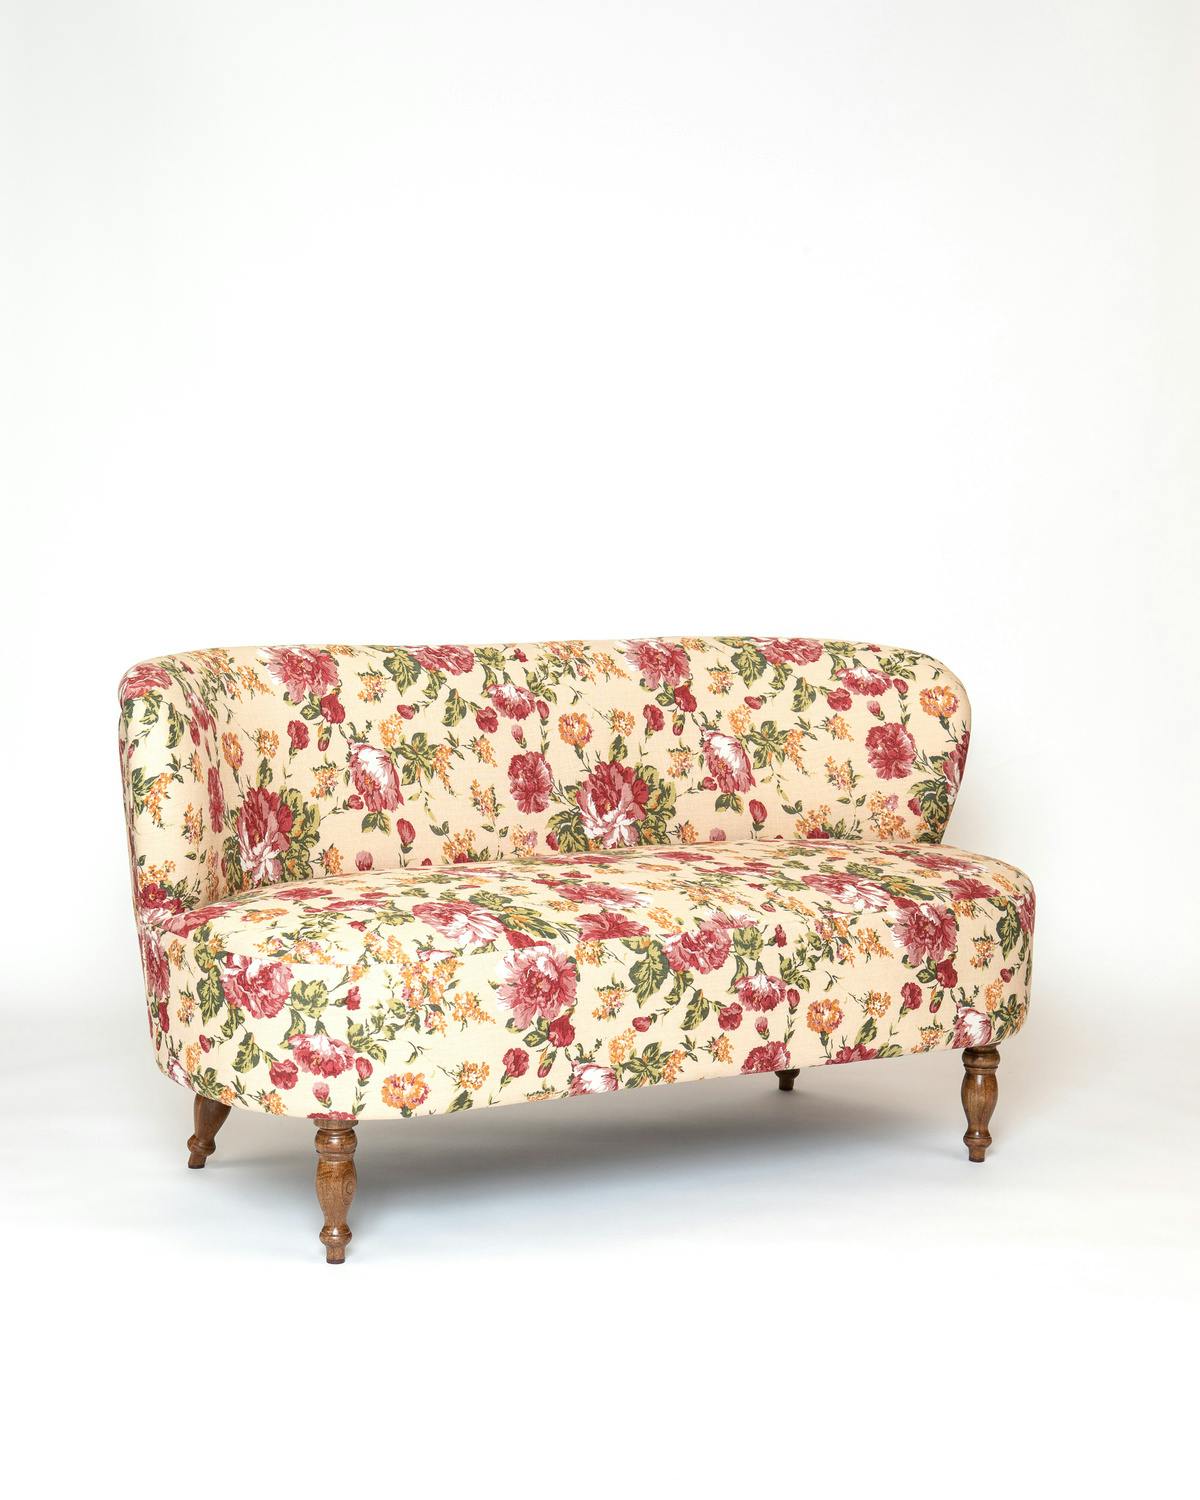 Sofa (In store exclusive), Big Flowers. Image #1